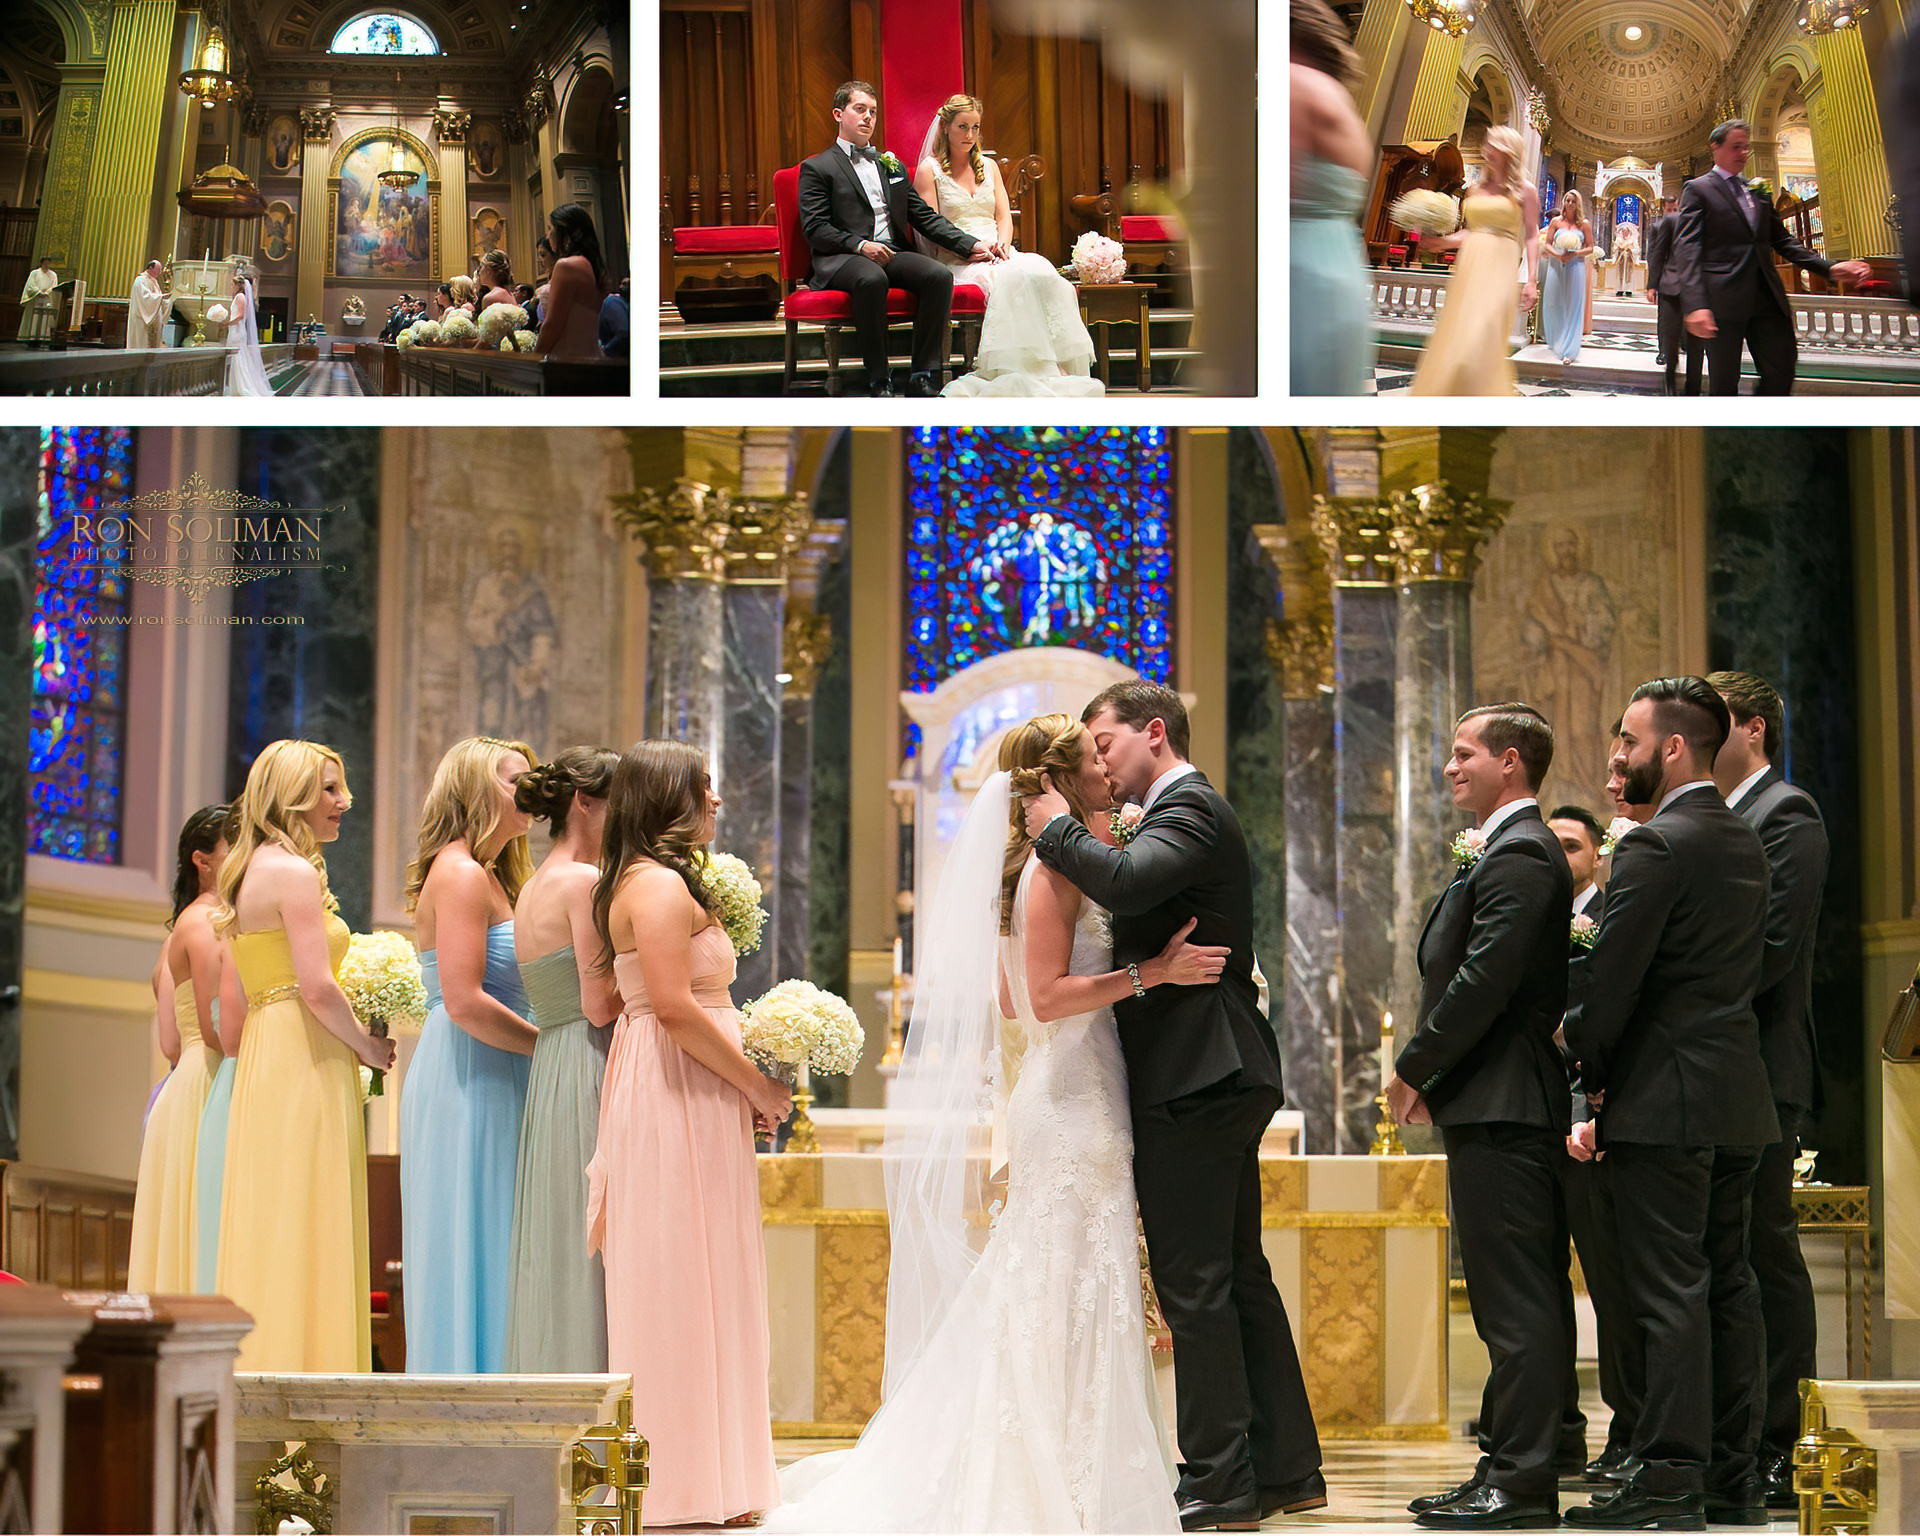 The Cathedral Basilica of Saints Peter and Paul wedding